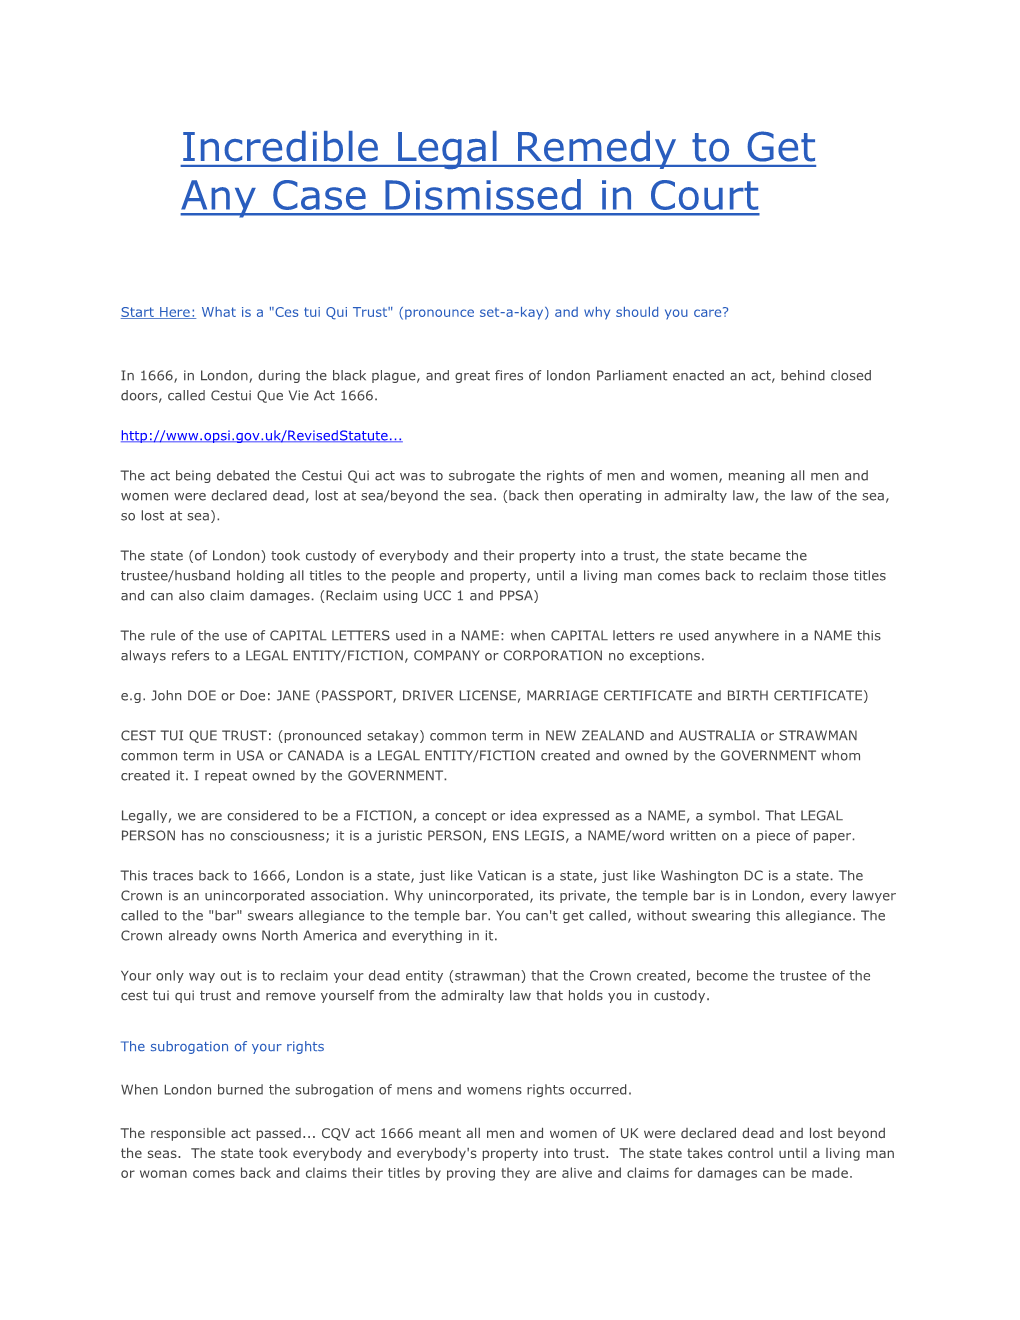 Incredible Legal Remedy to Get Any Case Dismissed in Court